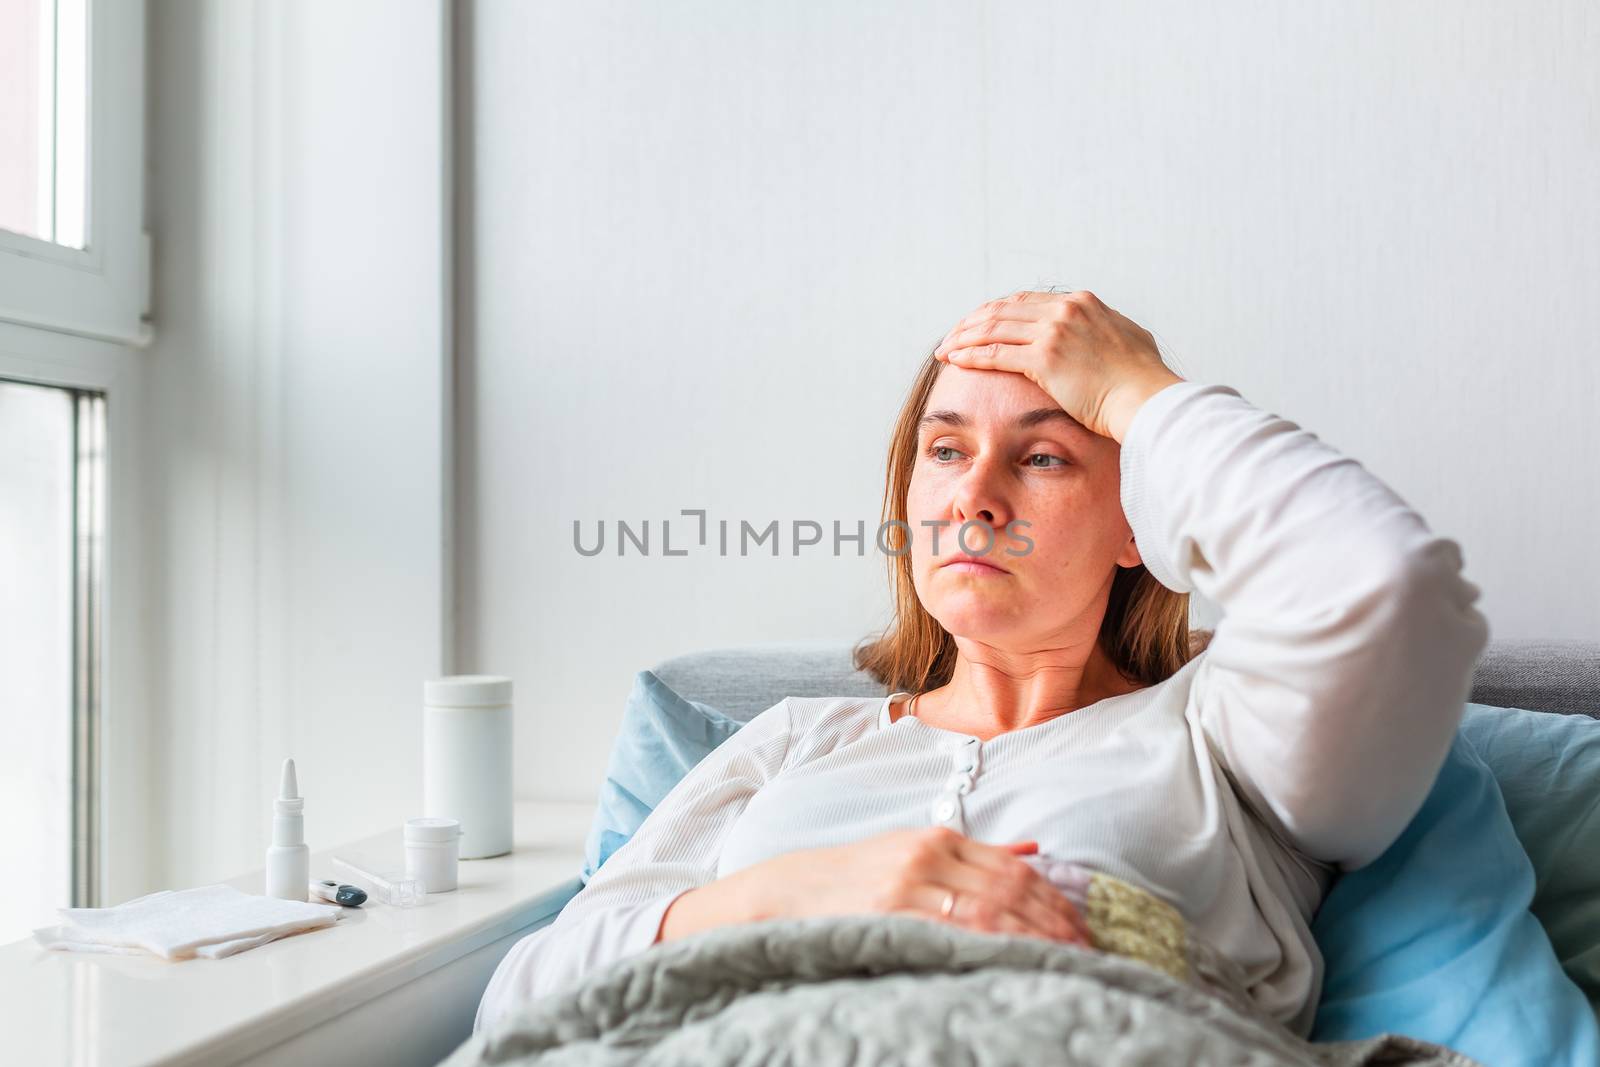 Sick woman with headache and fever lying under the blanket. Sick woman staying in bed with temperature durong coronavirus pandemic. Sick woman covered with a blanket lying in bed with high fever and a flu, resting.